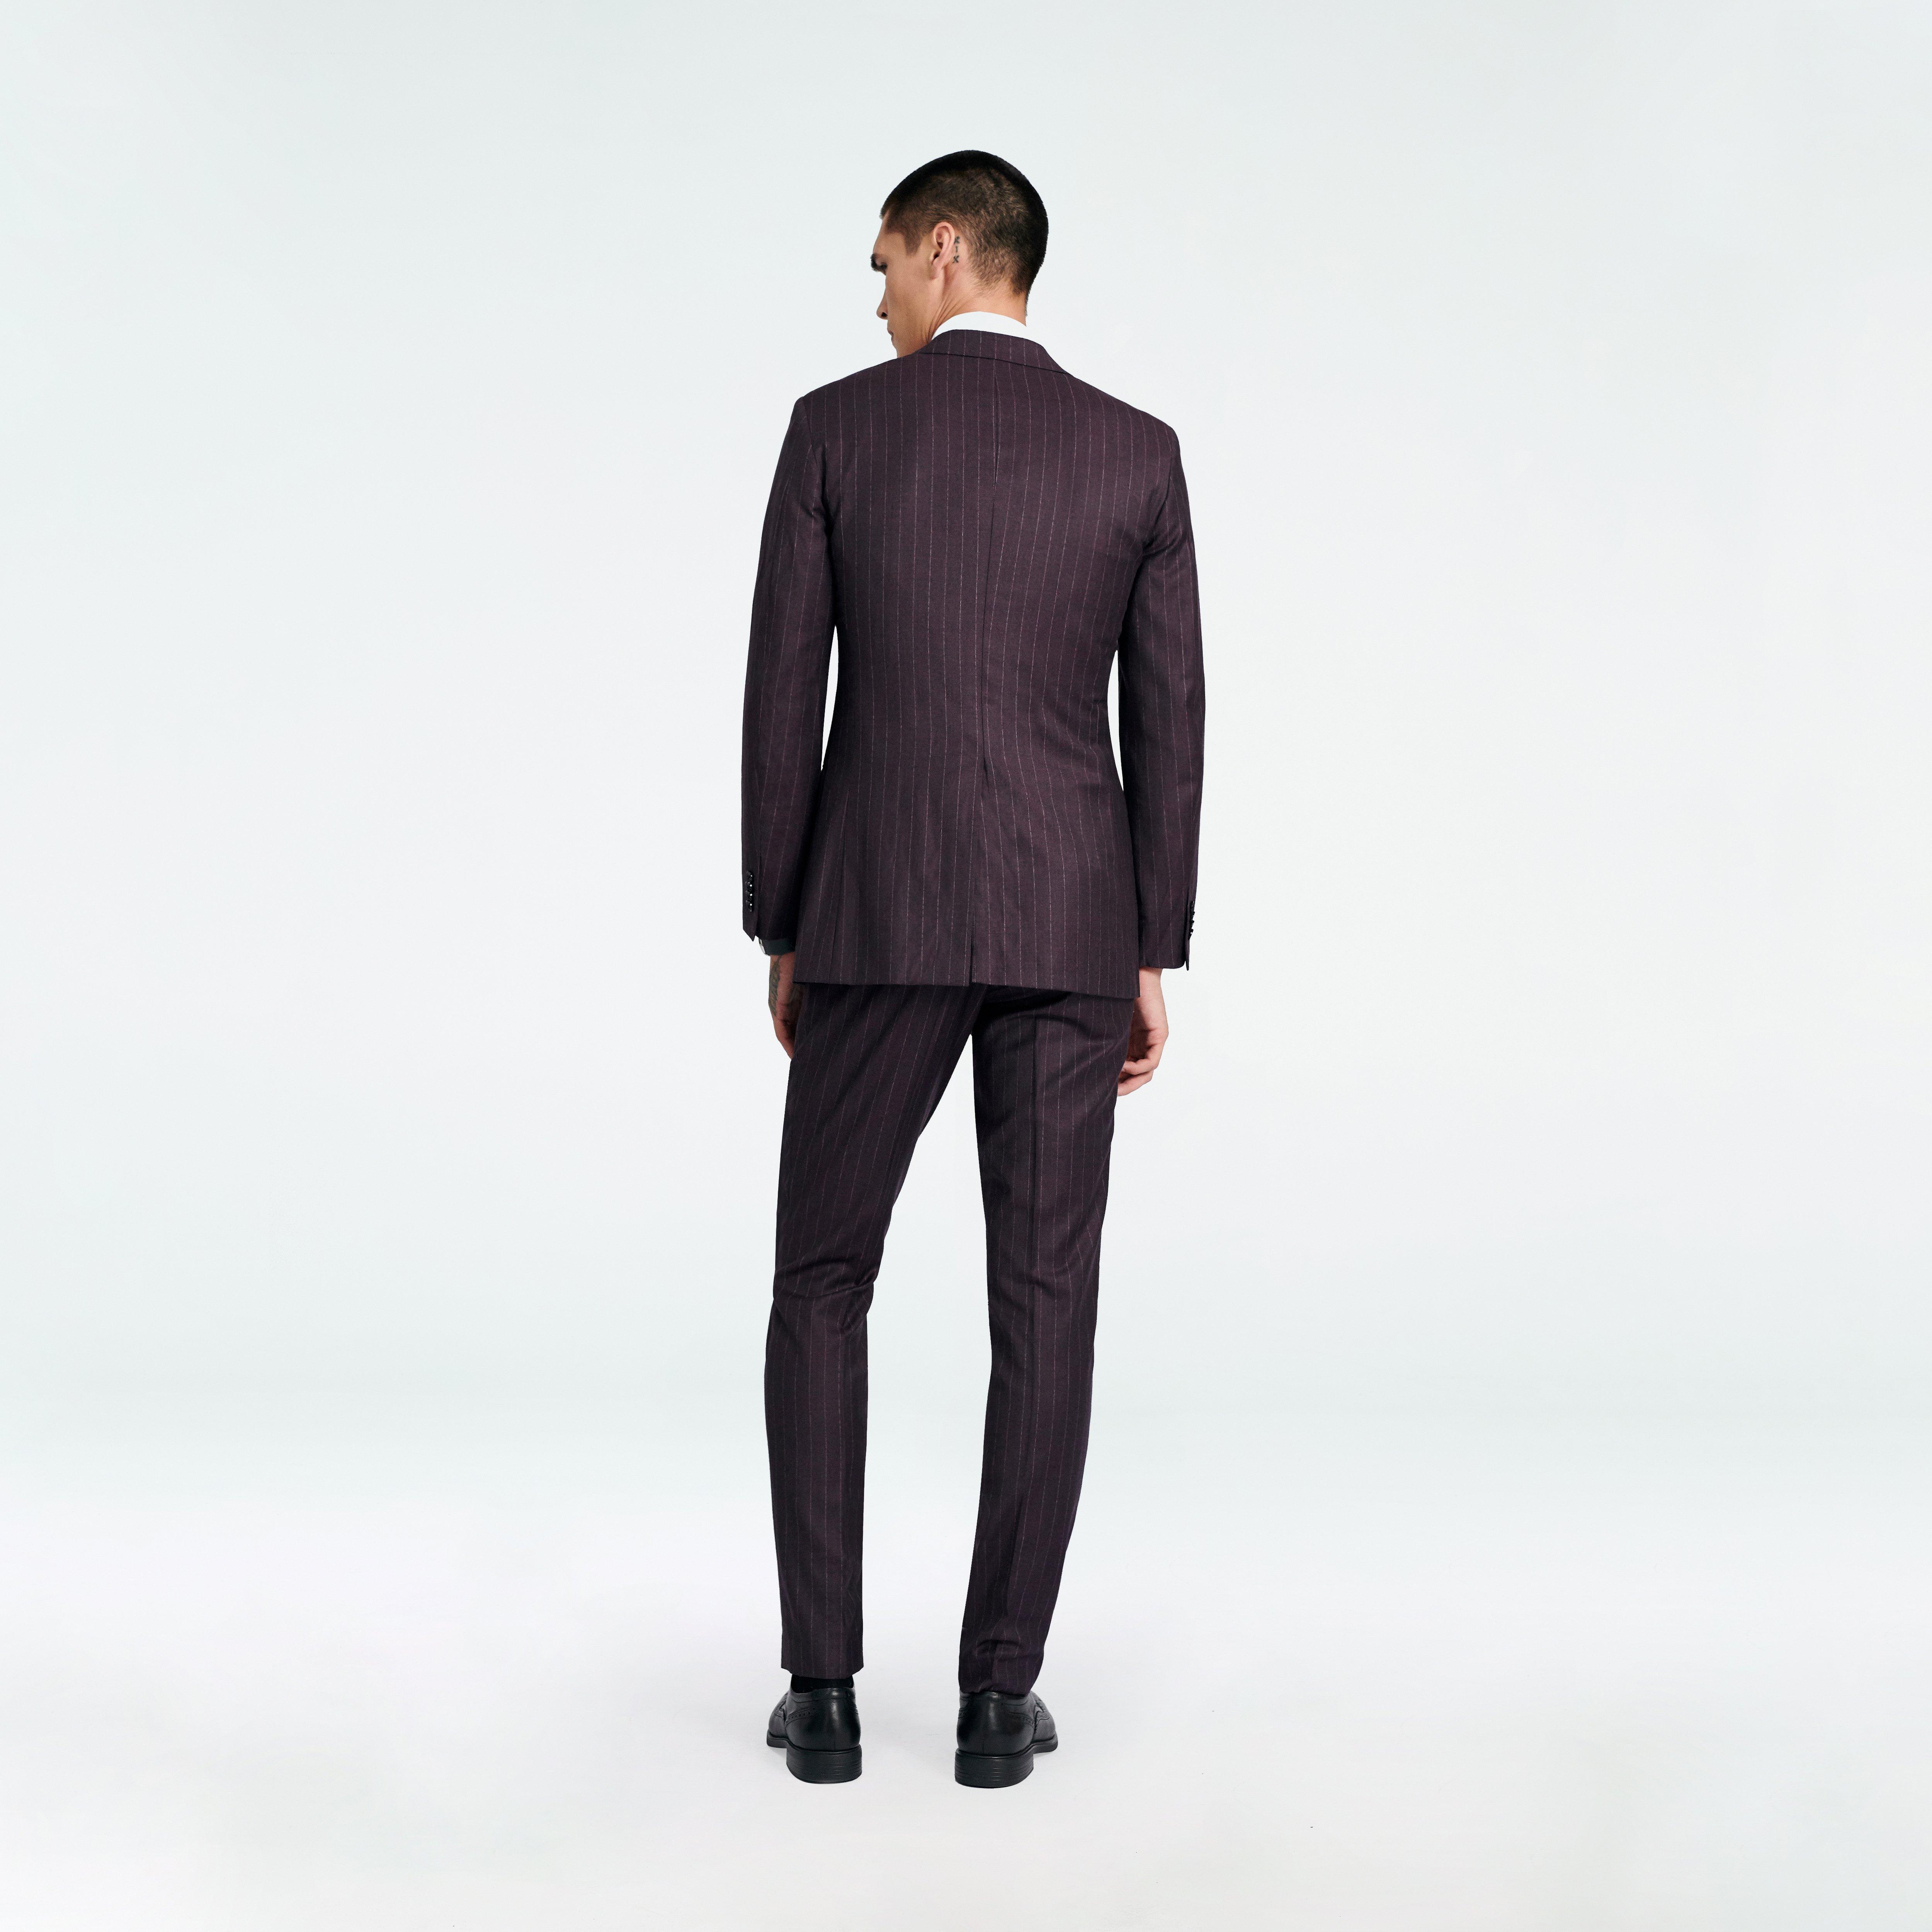 Custom Suits Made For You - Reigate Stripe Plum Suit | INDOCHINO